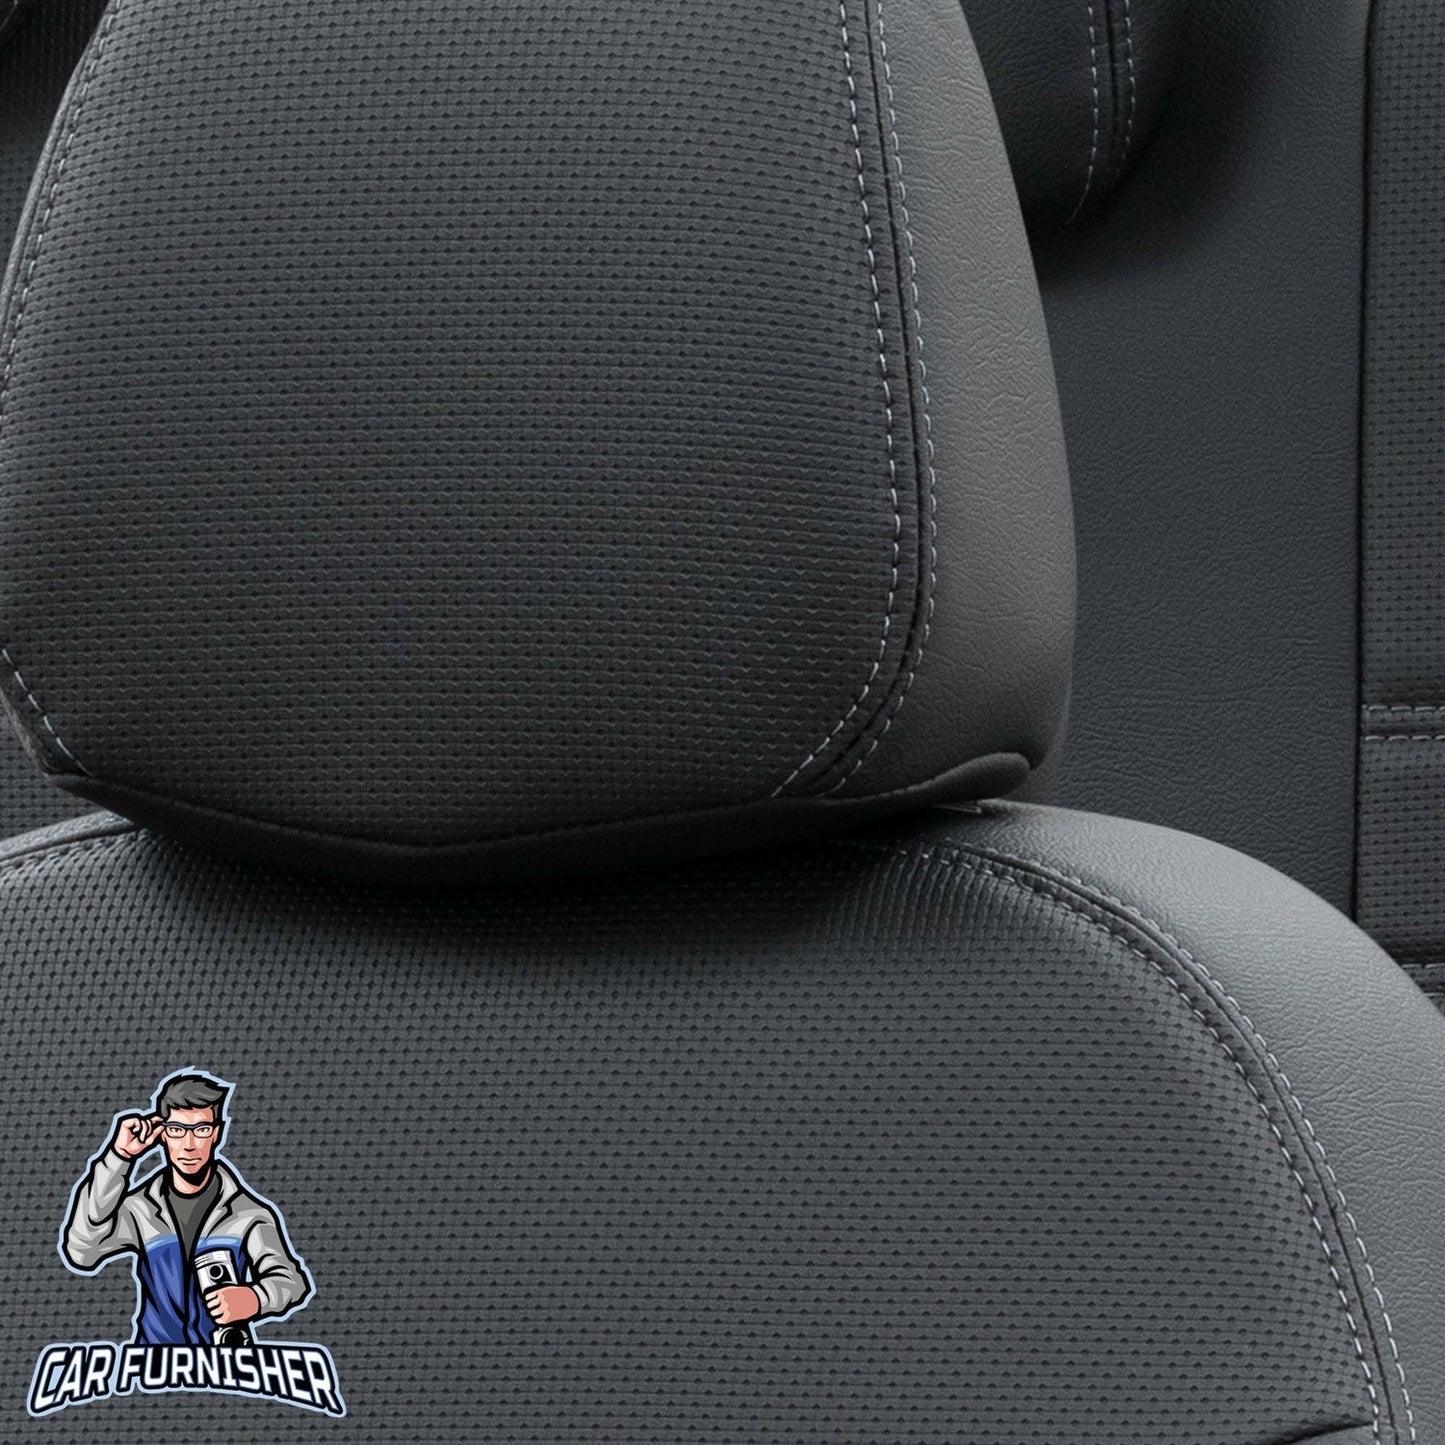 Dacia Lodgy Seat Covers New York Leather Design Black Leather